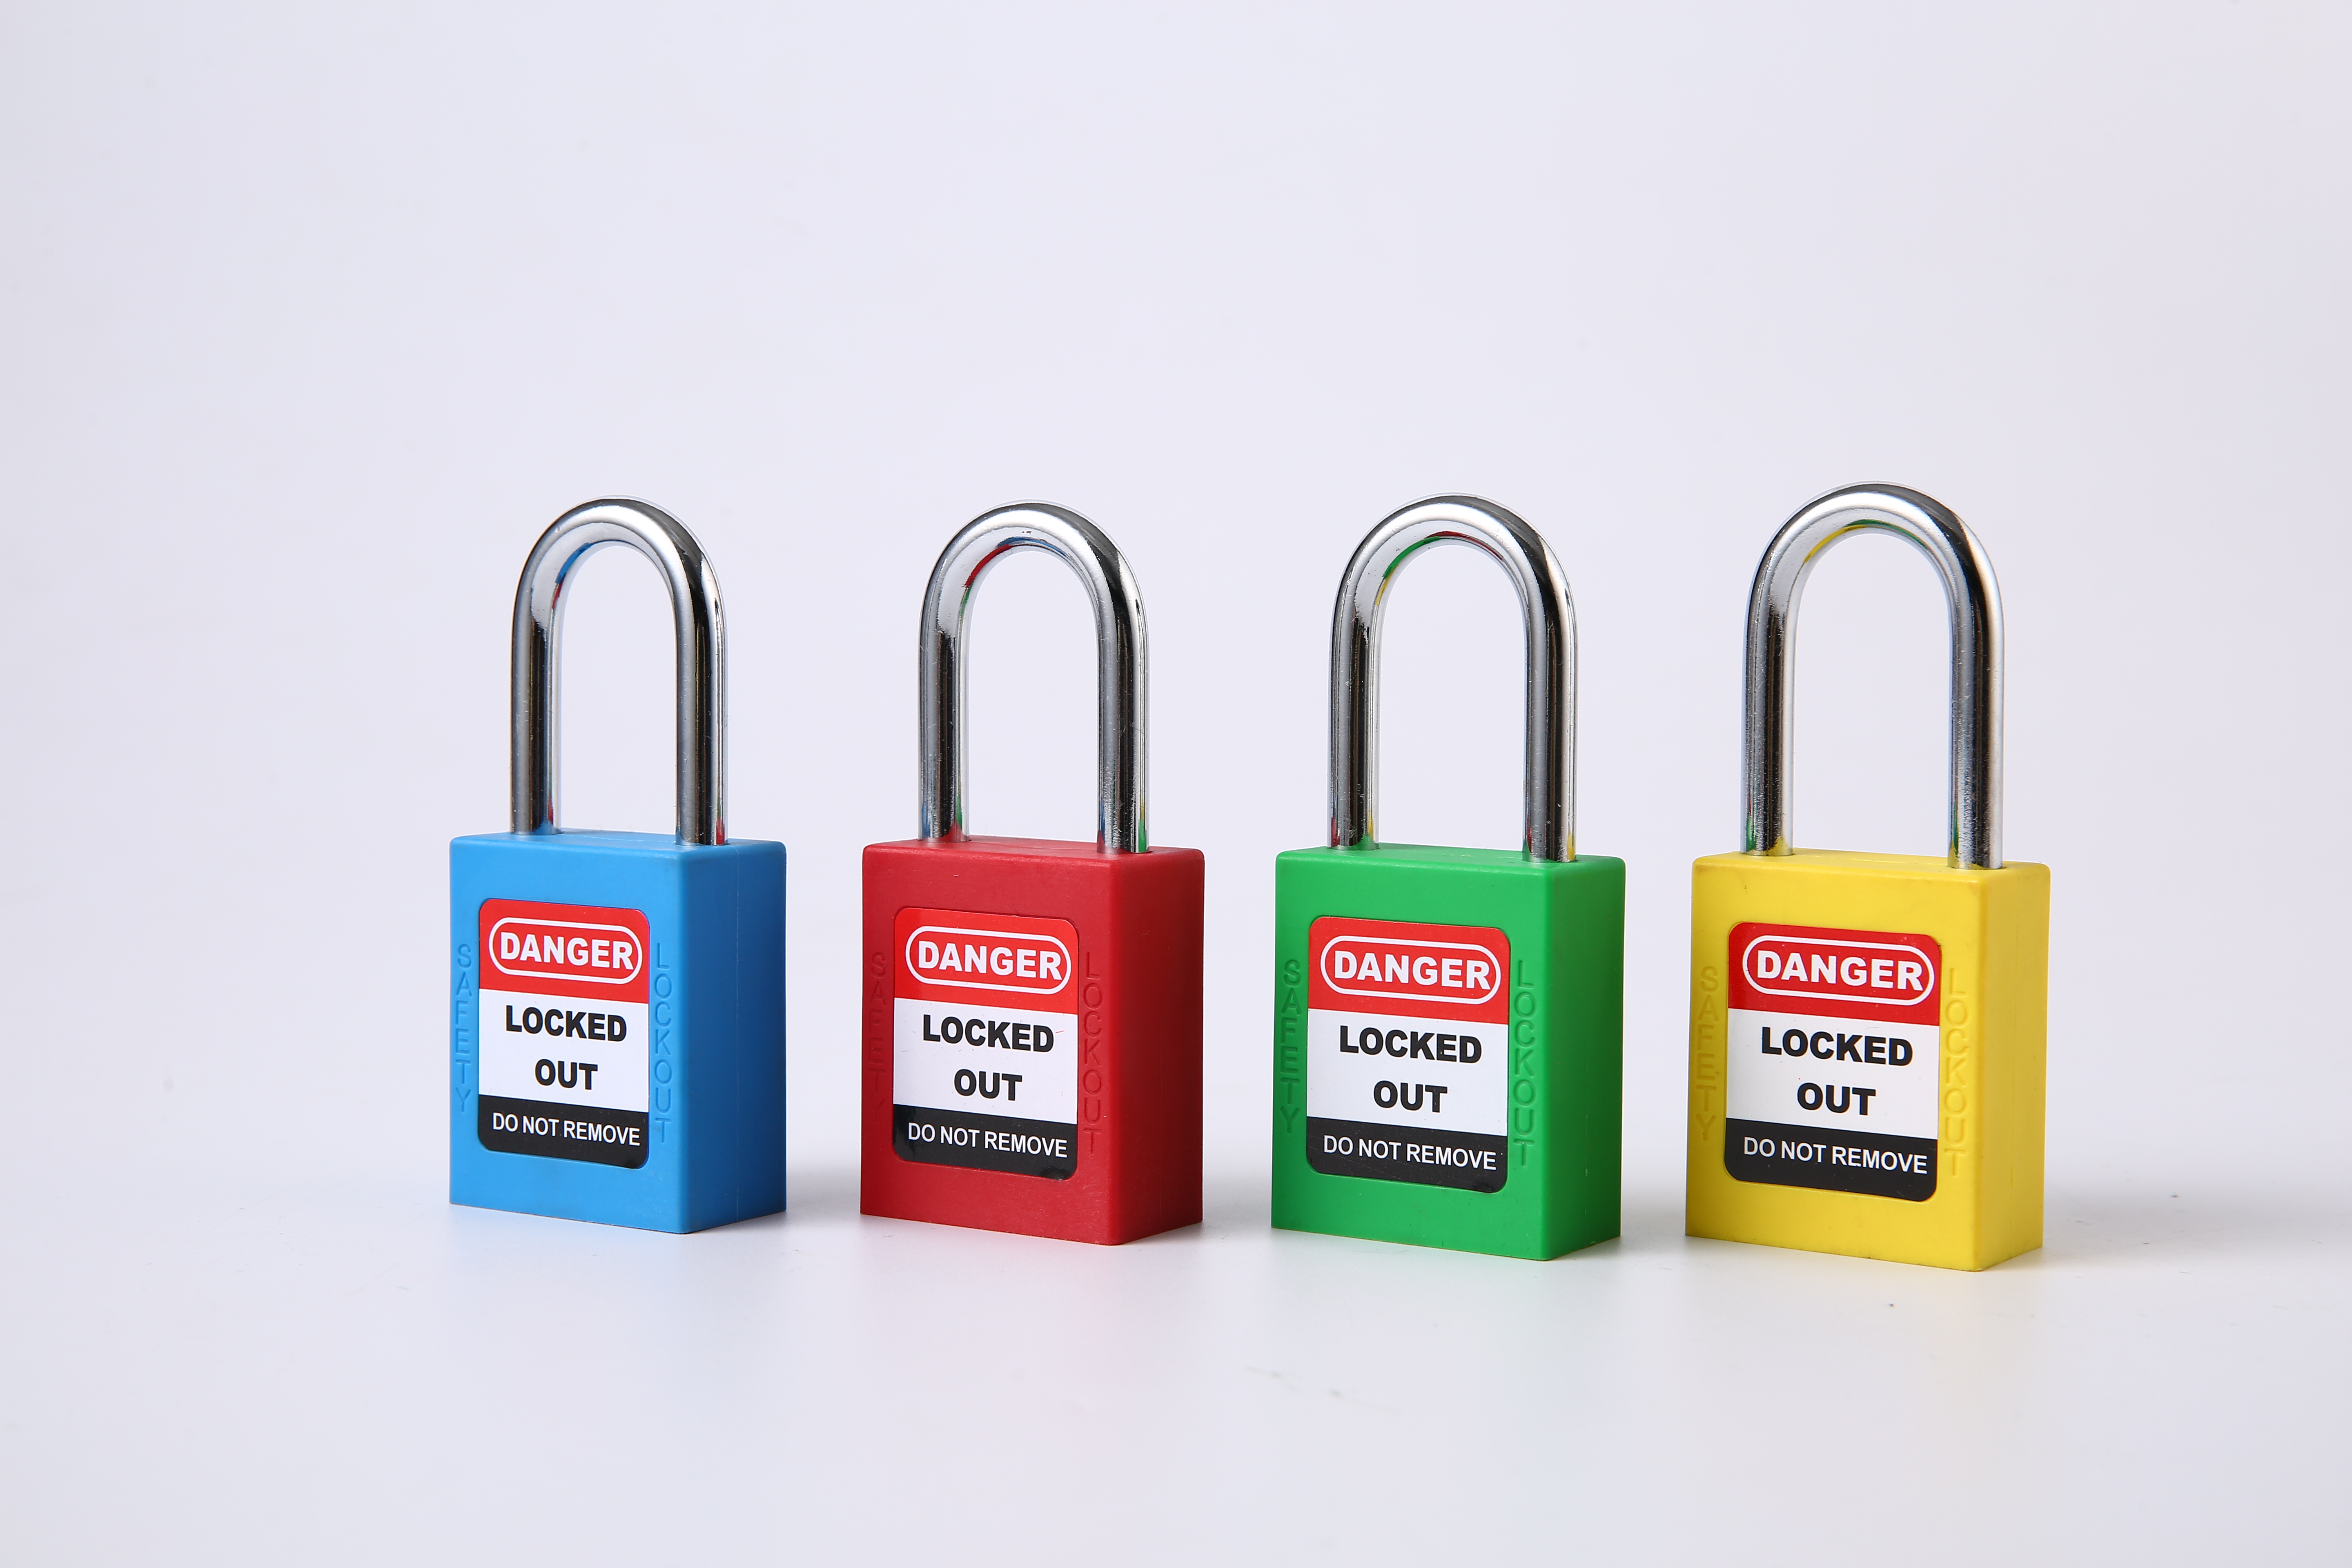 “Keep your workers safe with our premium safety locks”